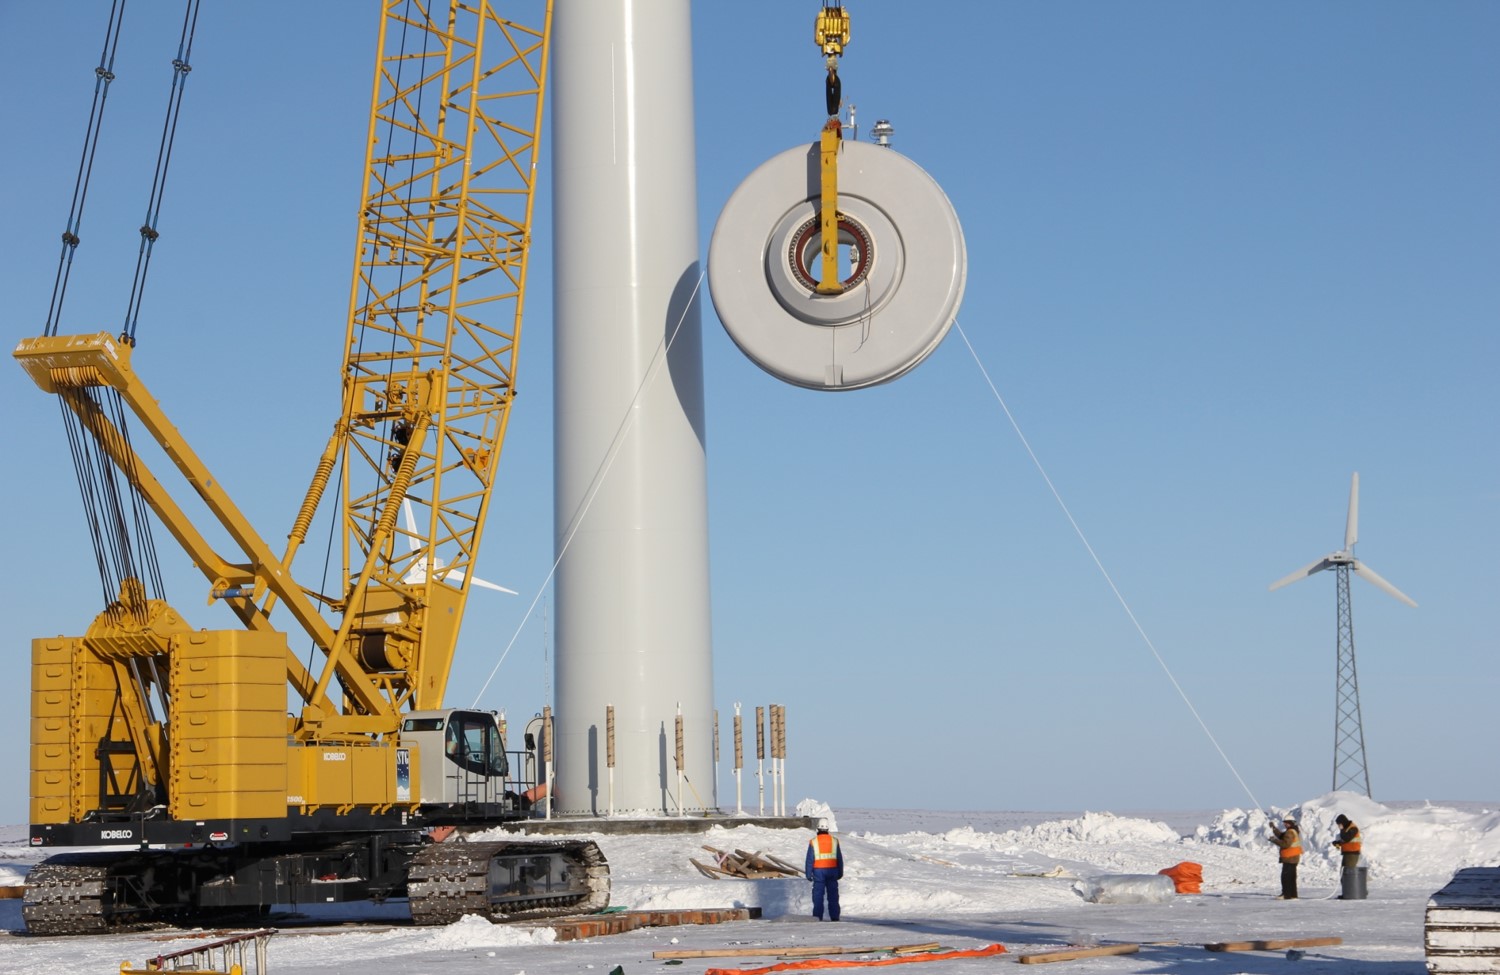 Large orange crane lifts round wind turbine part during winter installation. Small turbine visible in background.